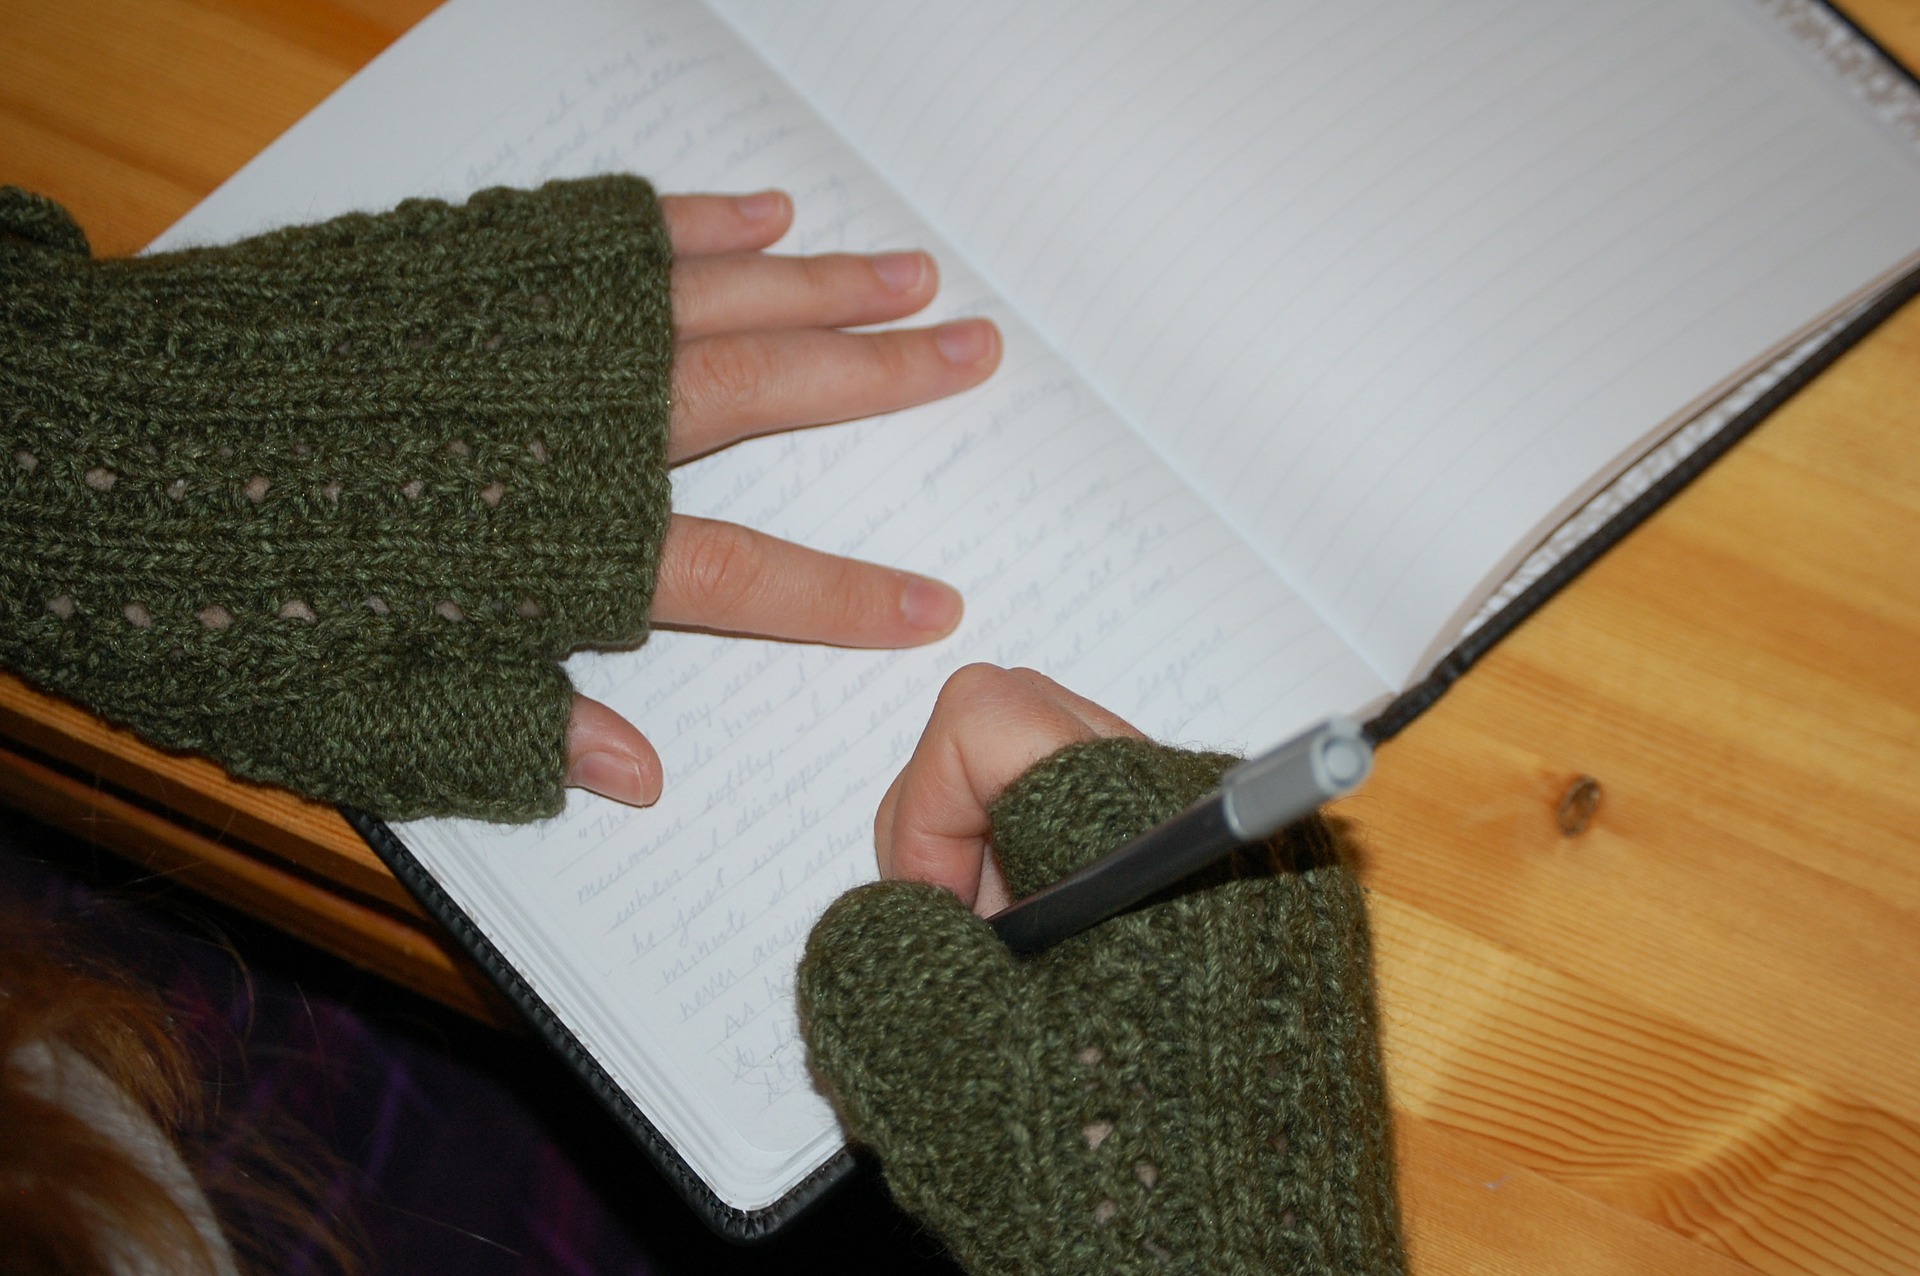 Image of person wearing gloves writing in a journal